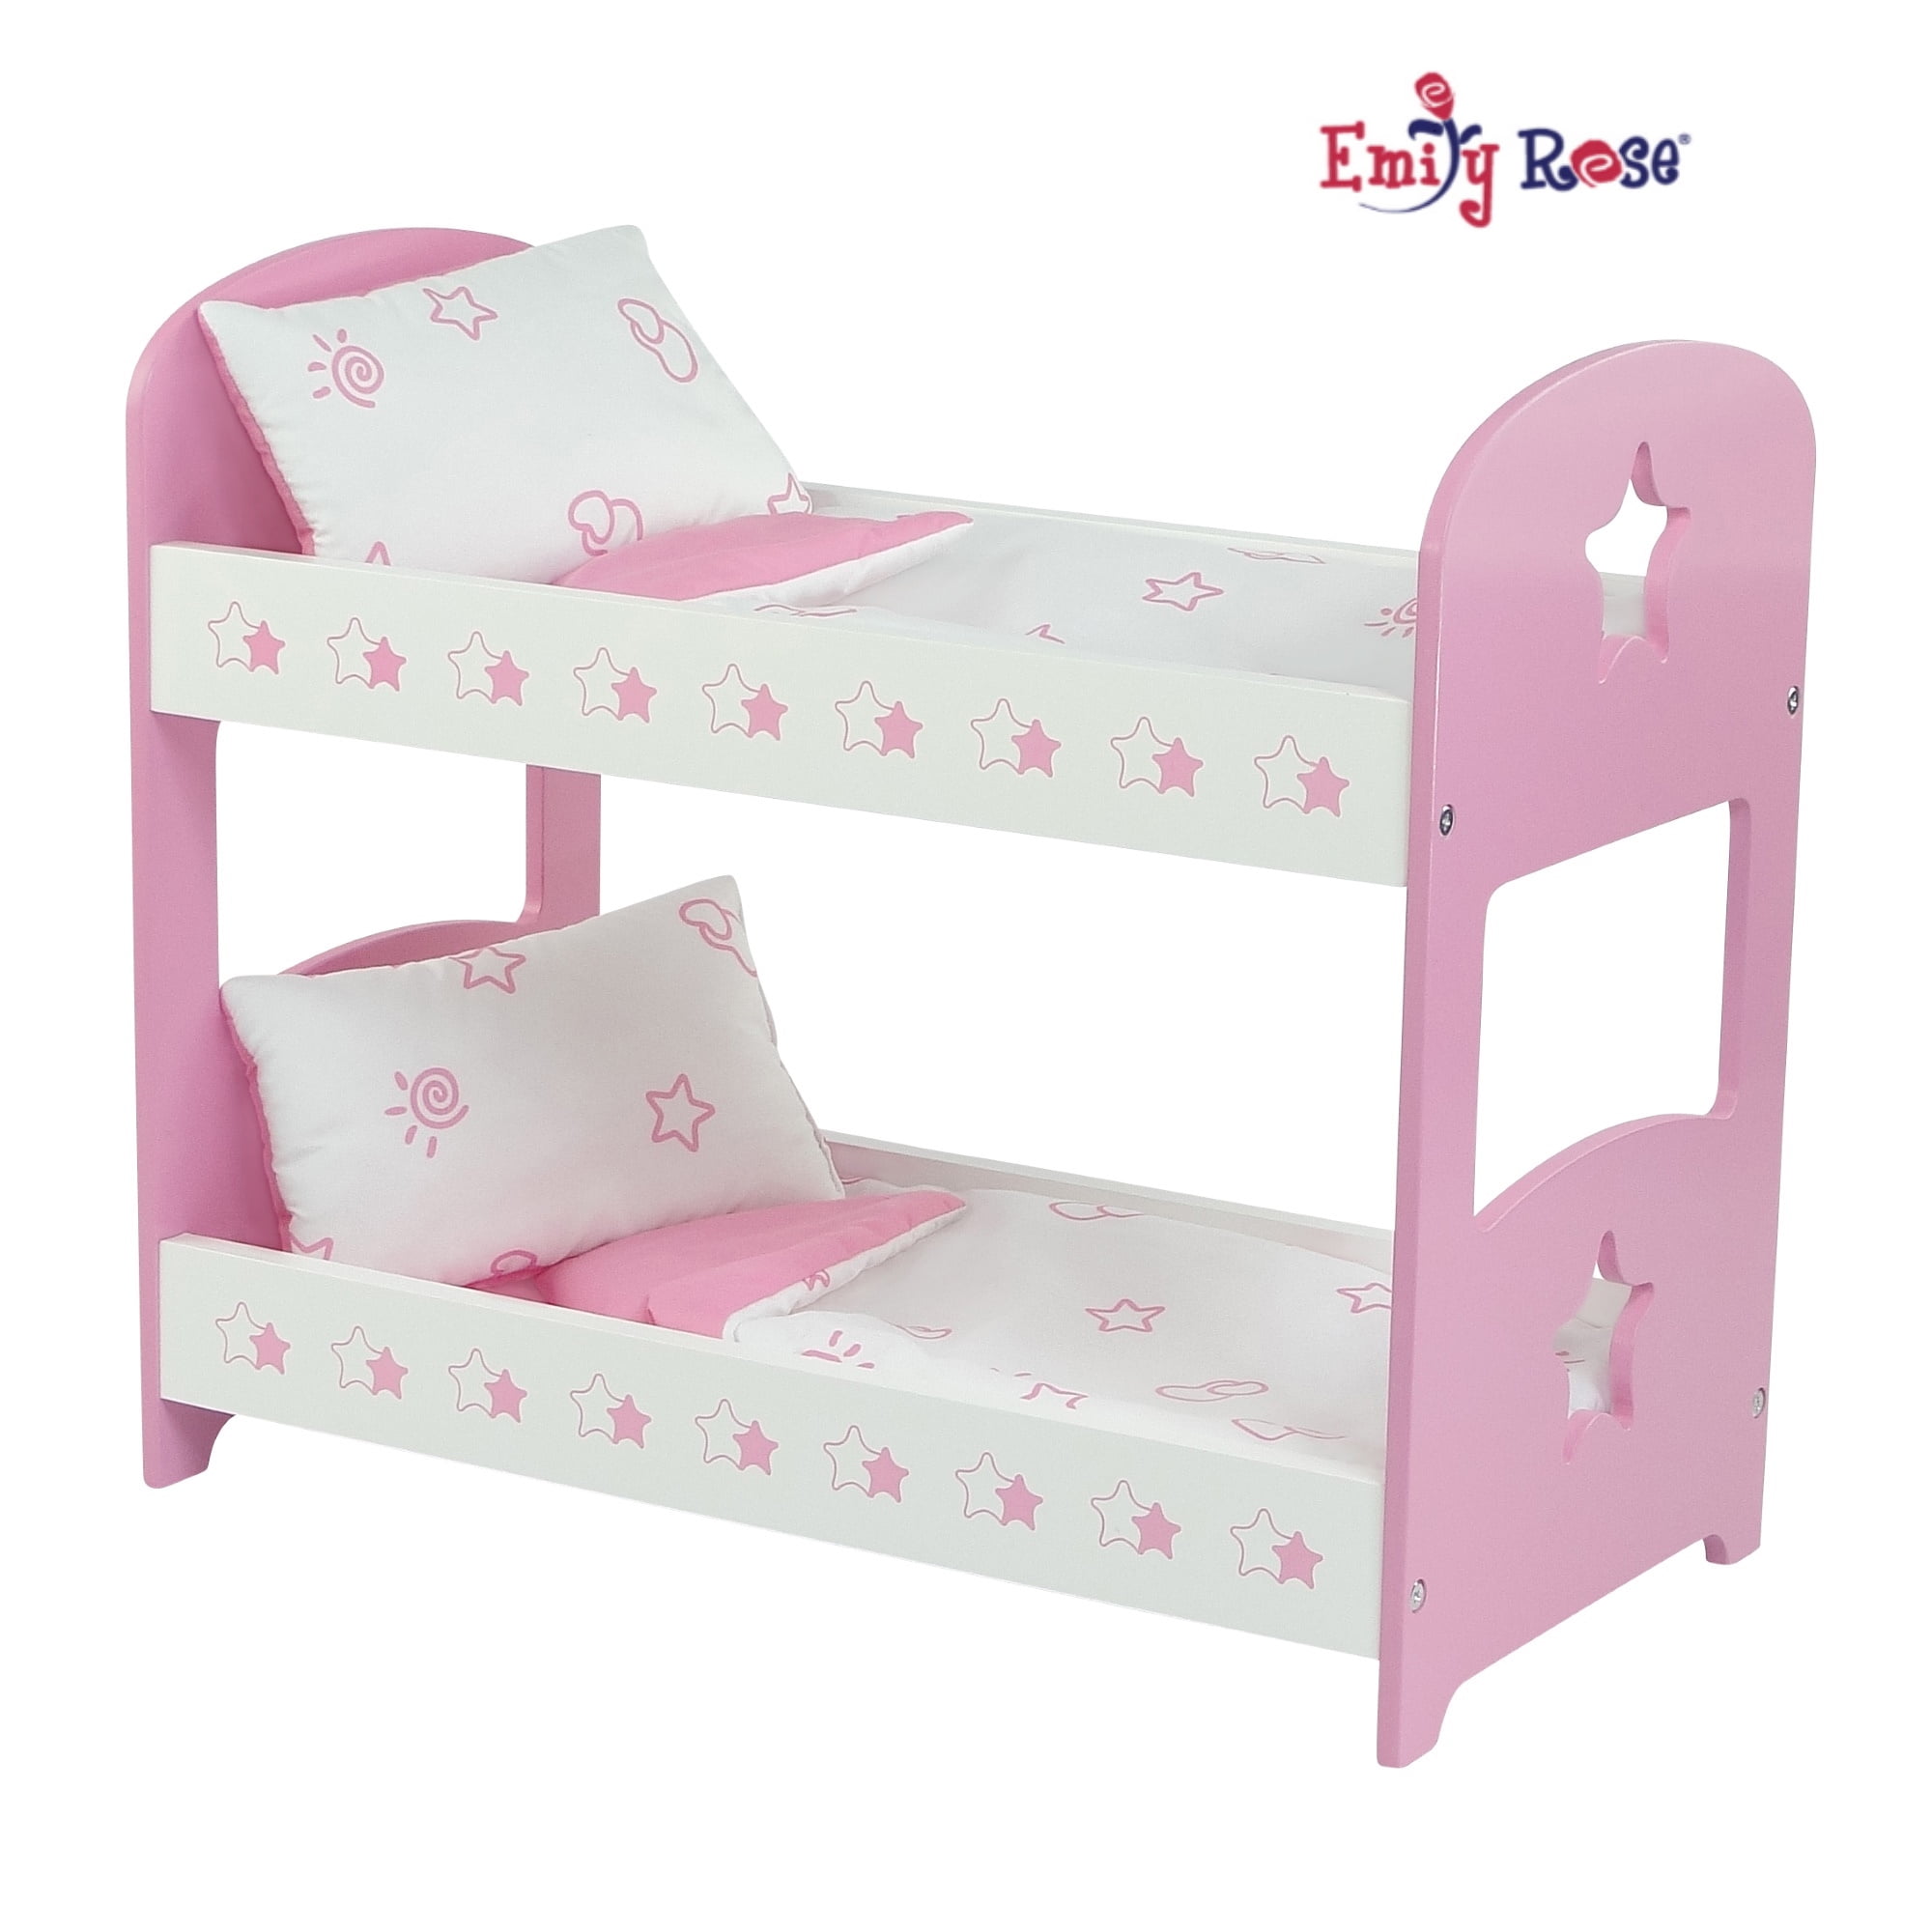 18 Inch Doll Bunk Bed Furniture, Bedding For 18 Doll Bunk Beds